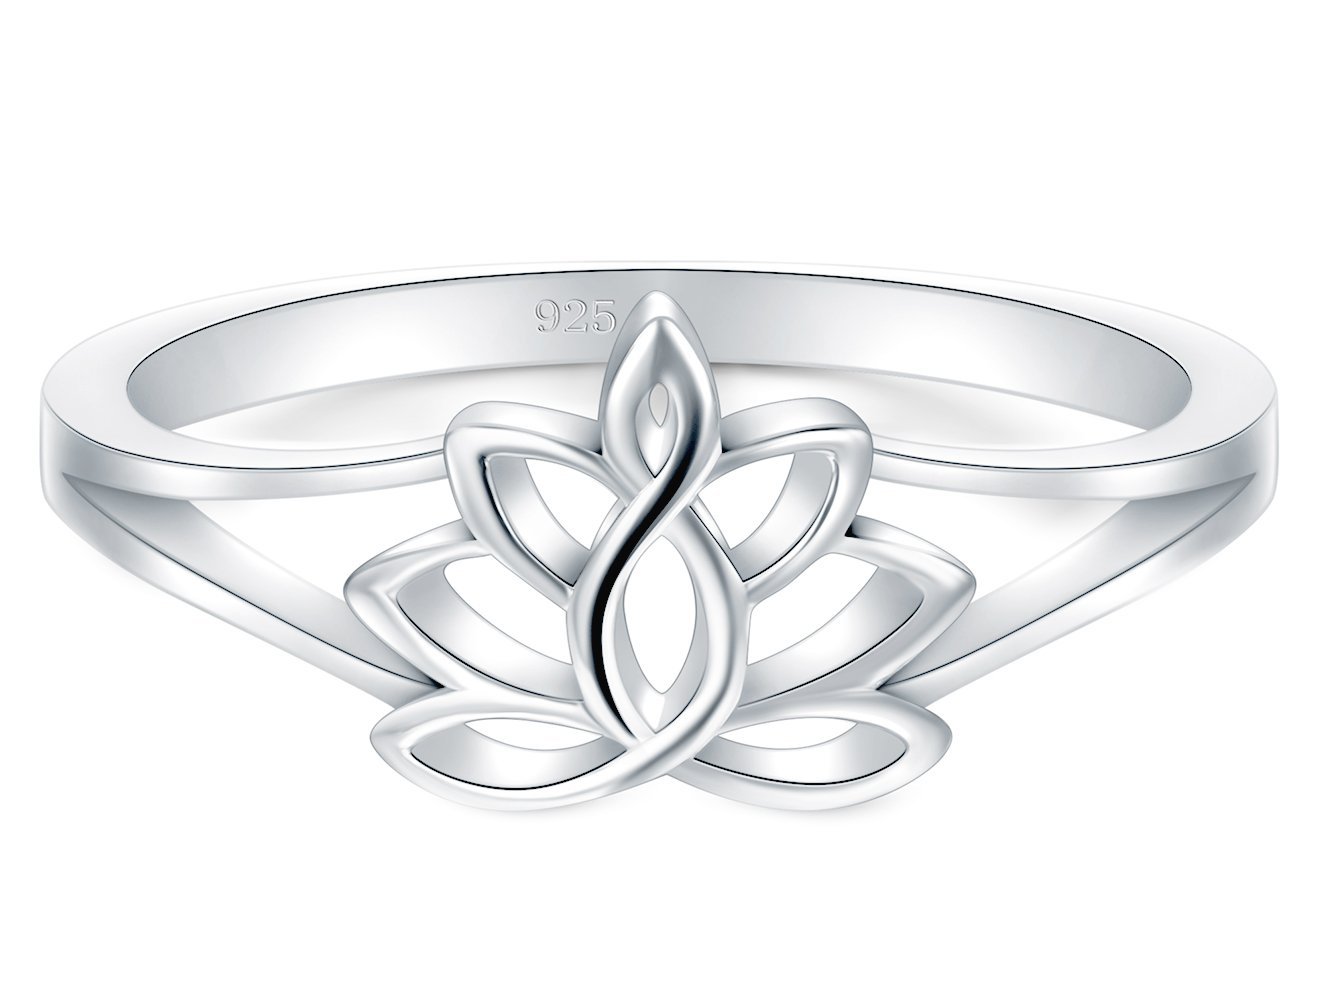 Book Cover BORUO 925 Sterling Silver Ring, Lotus Flower Yoga High Polish Tarnish Resistant Comfort Fit Wedding Band Ring Lotus Flower 1 4